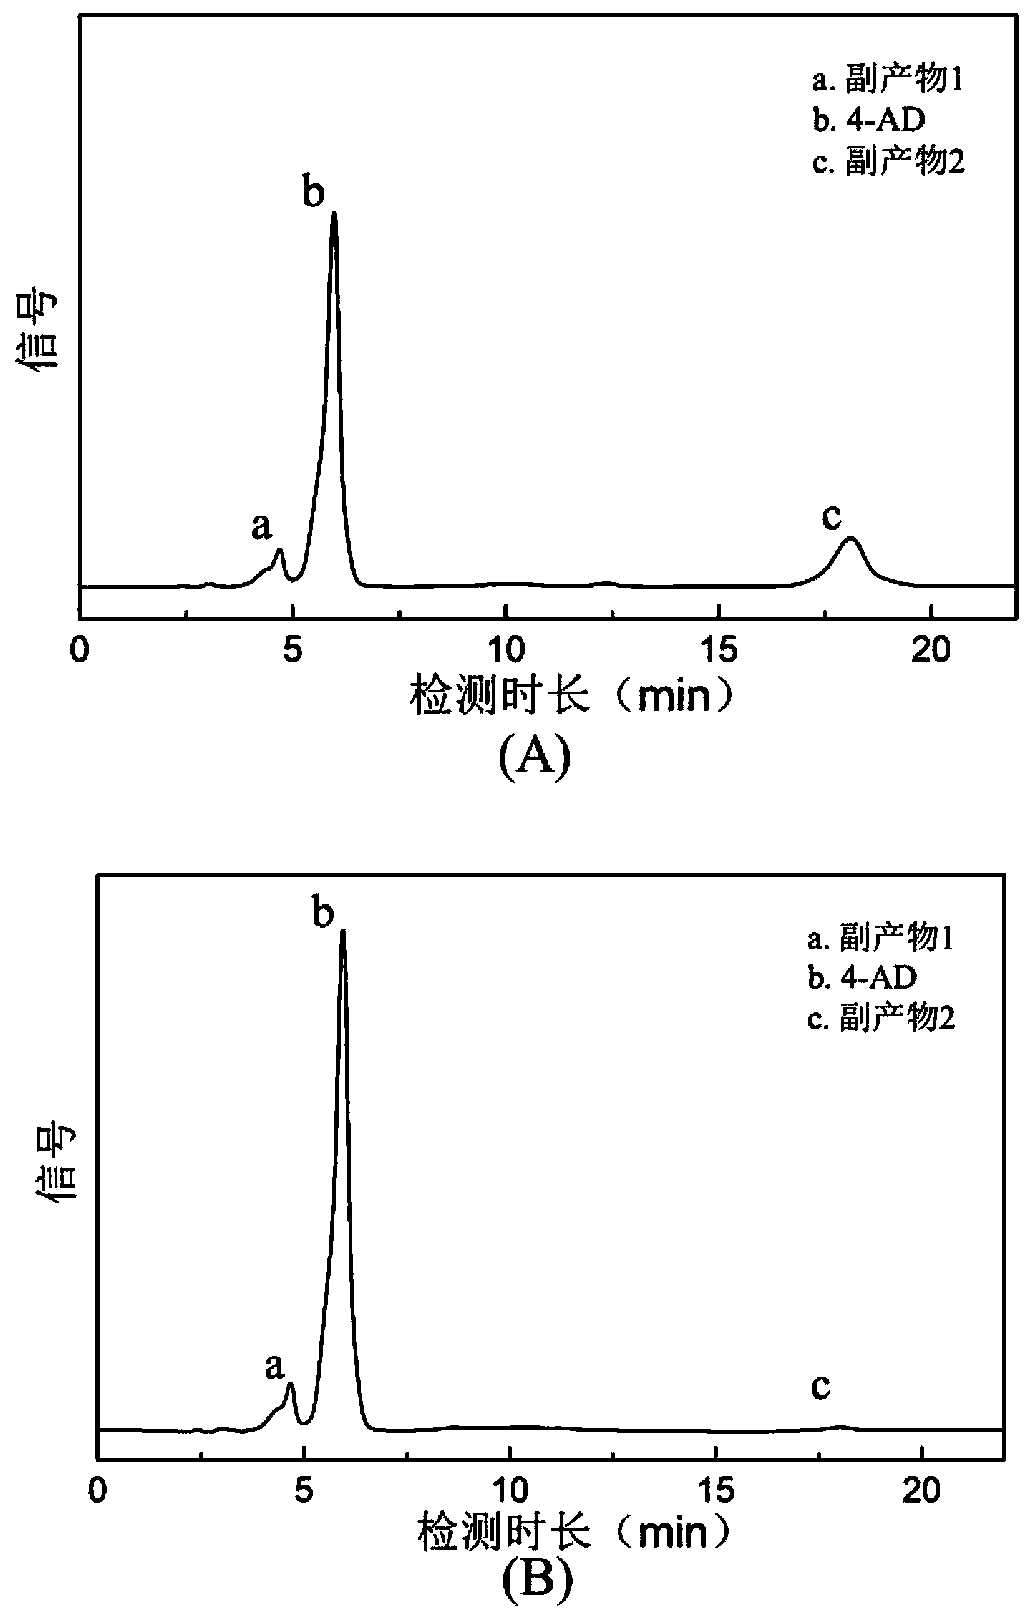 High-androstenedione-producing recombinant mycobacterium and construction method and application of high-androstenedione-producing recombinant mycobacterium